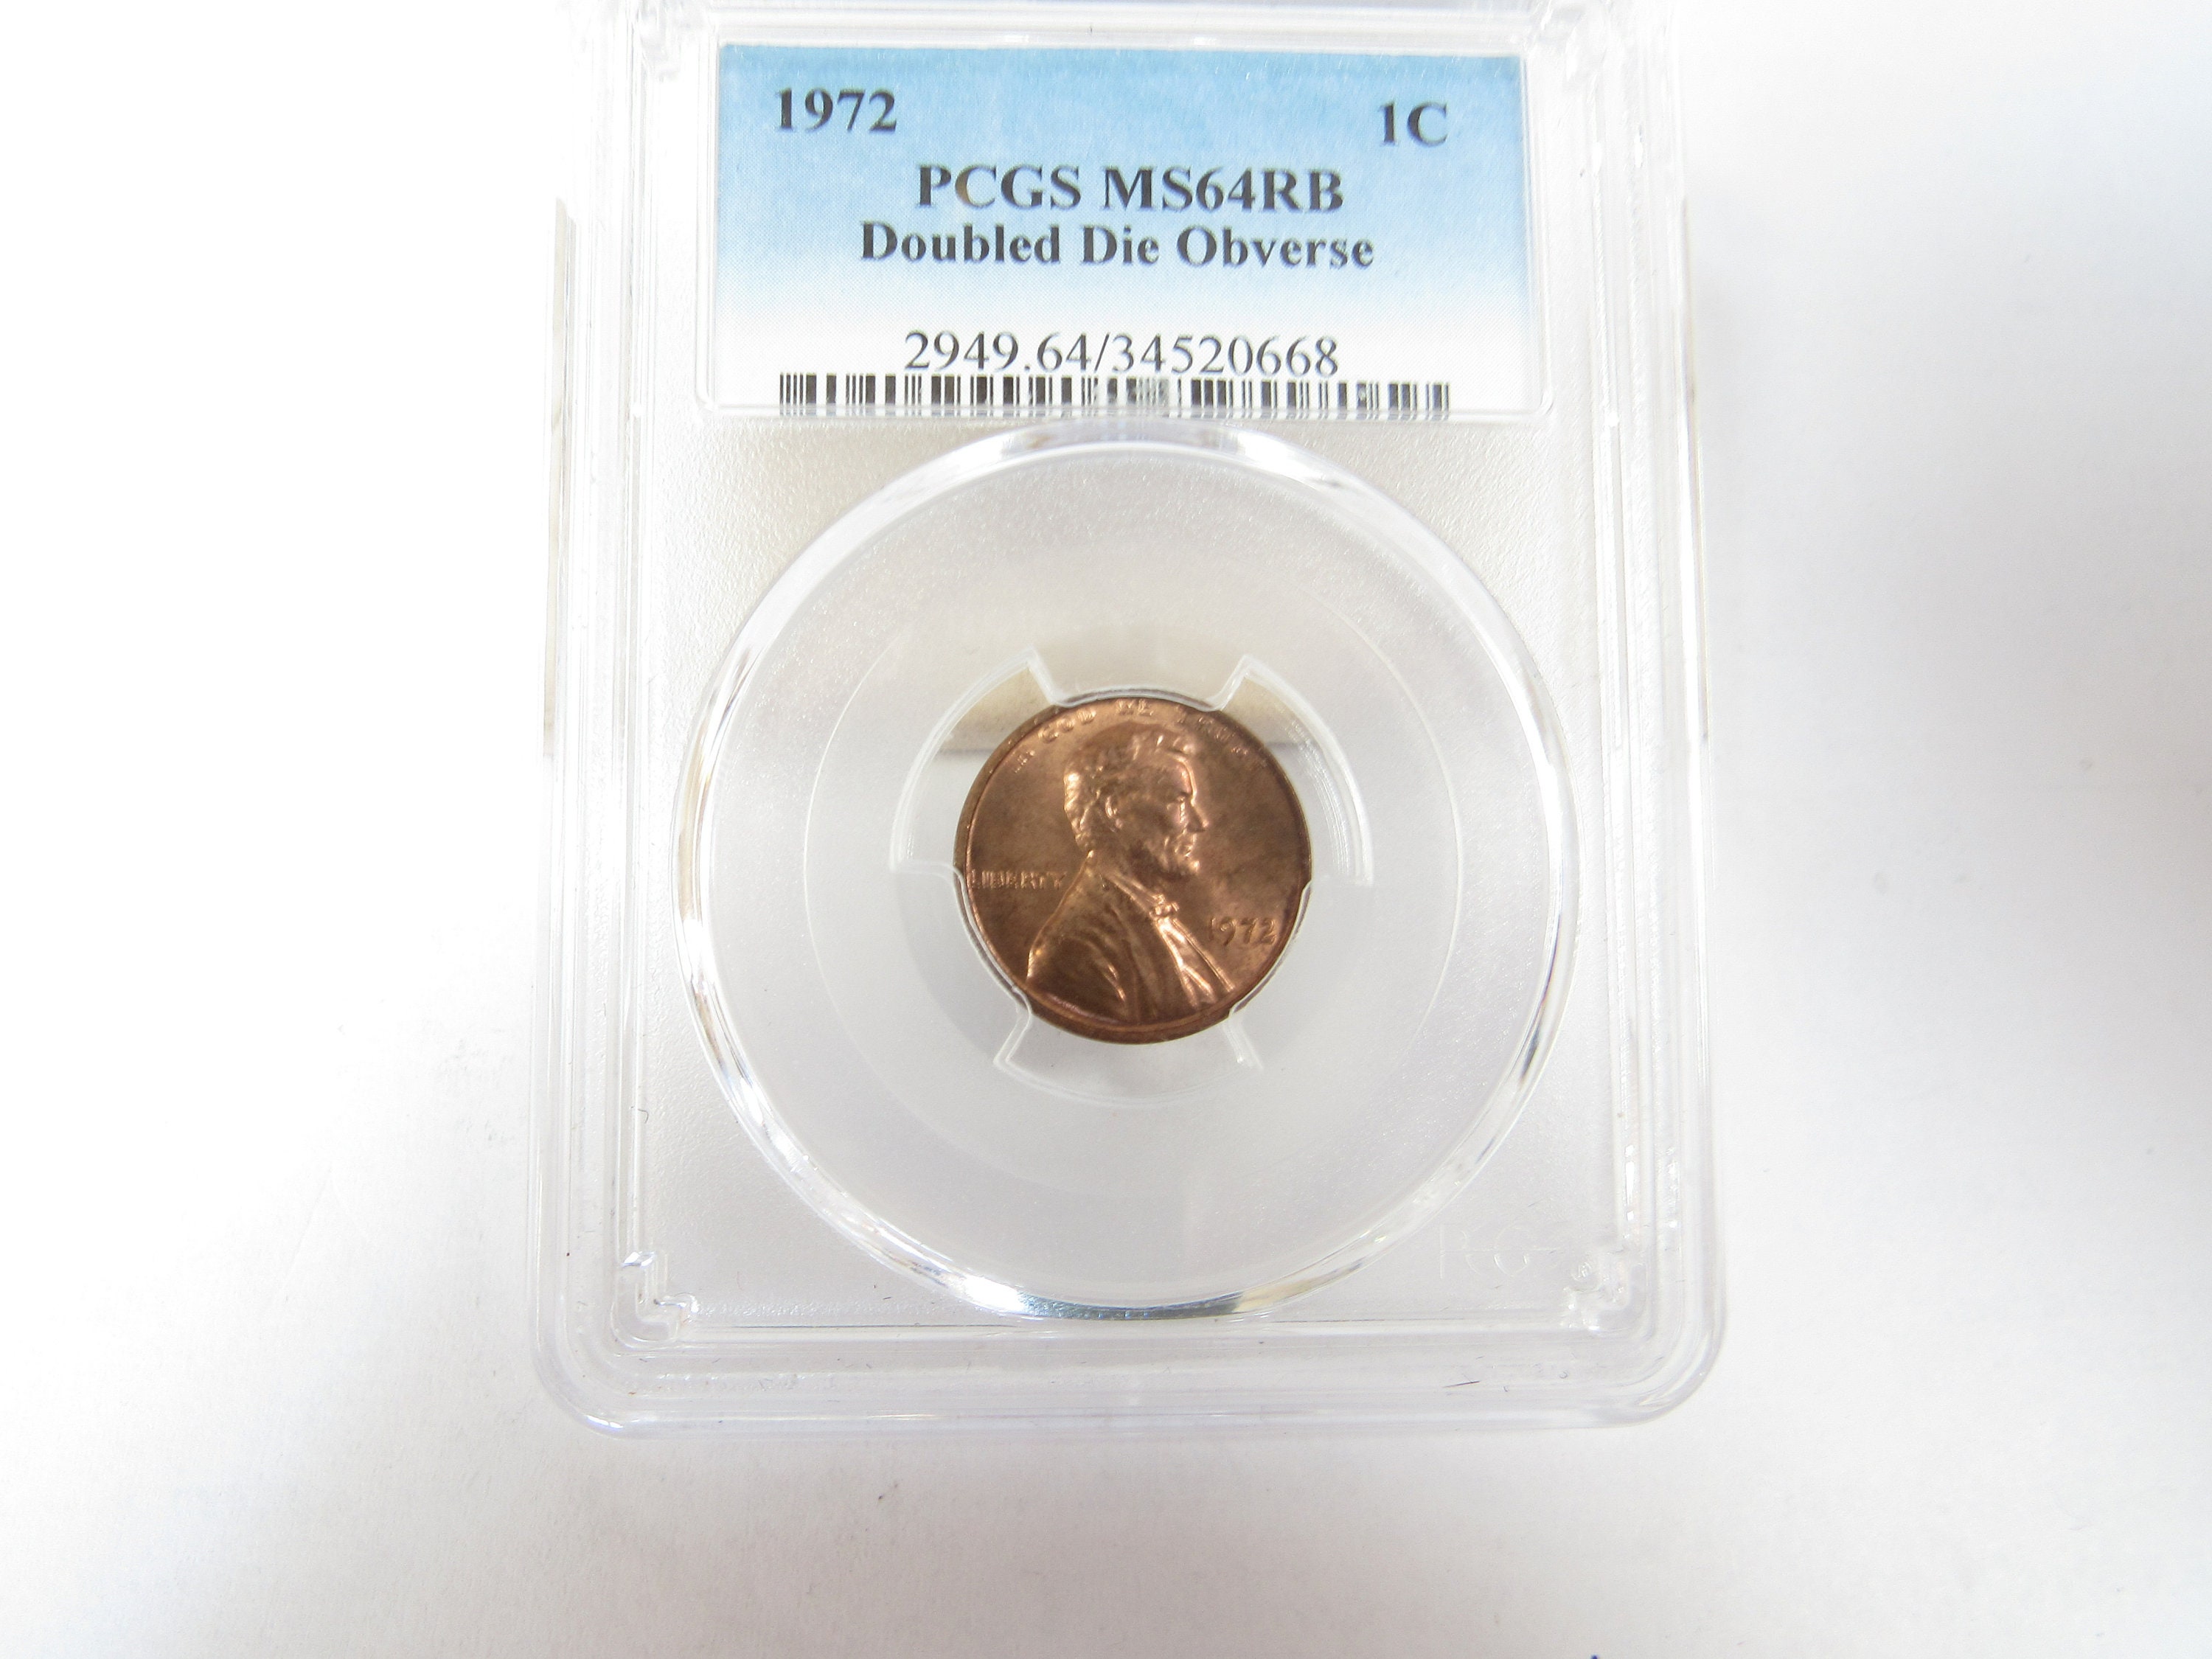 1964 SMS Lincoln Cent, MS66RD PCGS, Great Rarity - VDB Coins